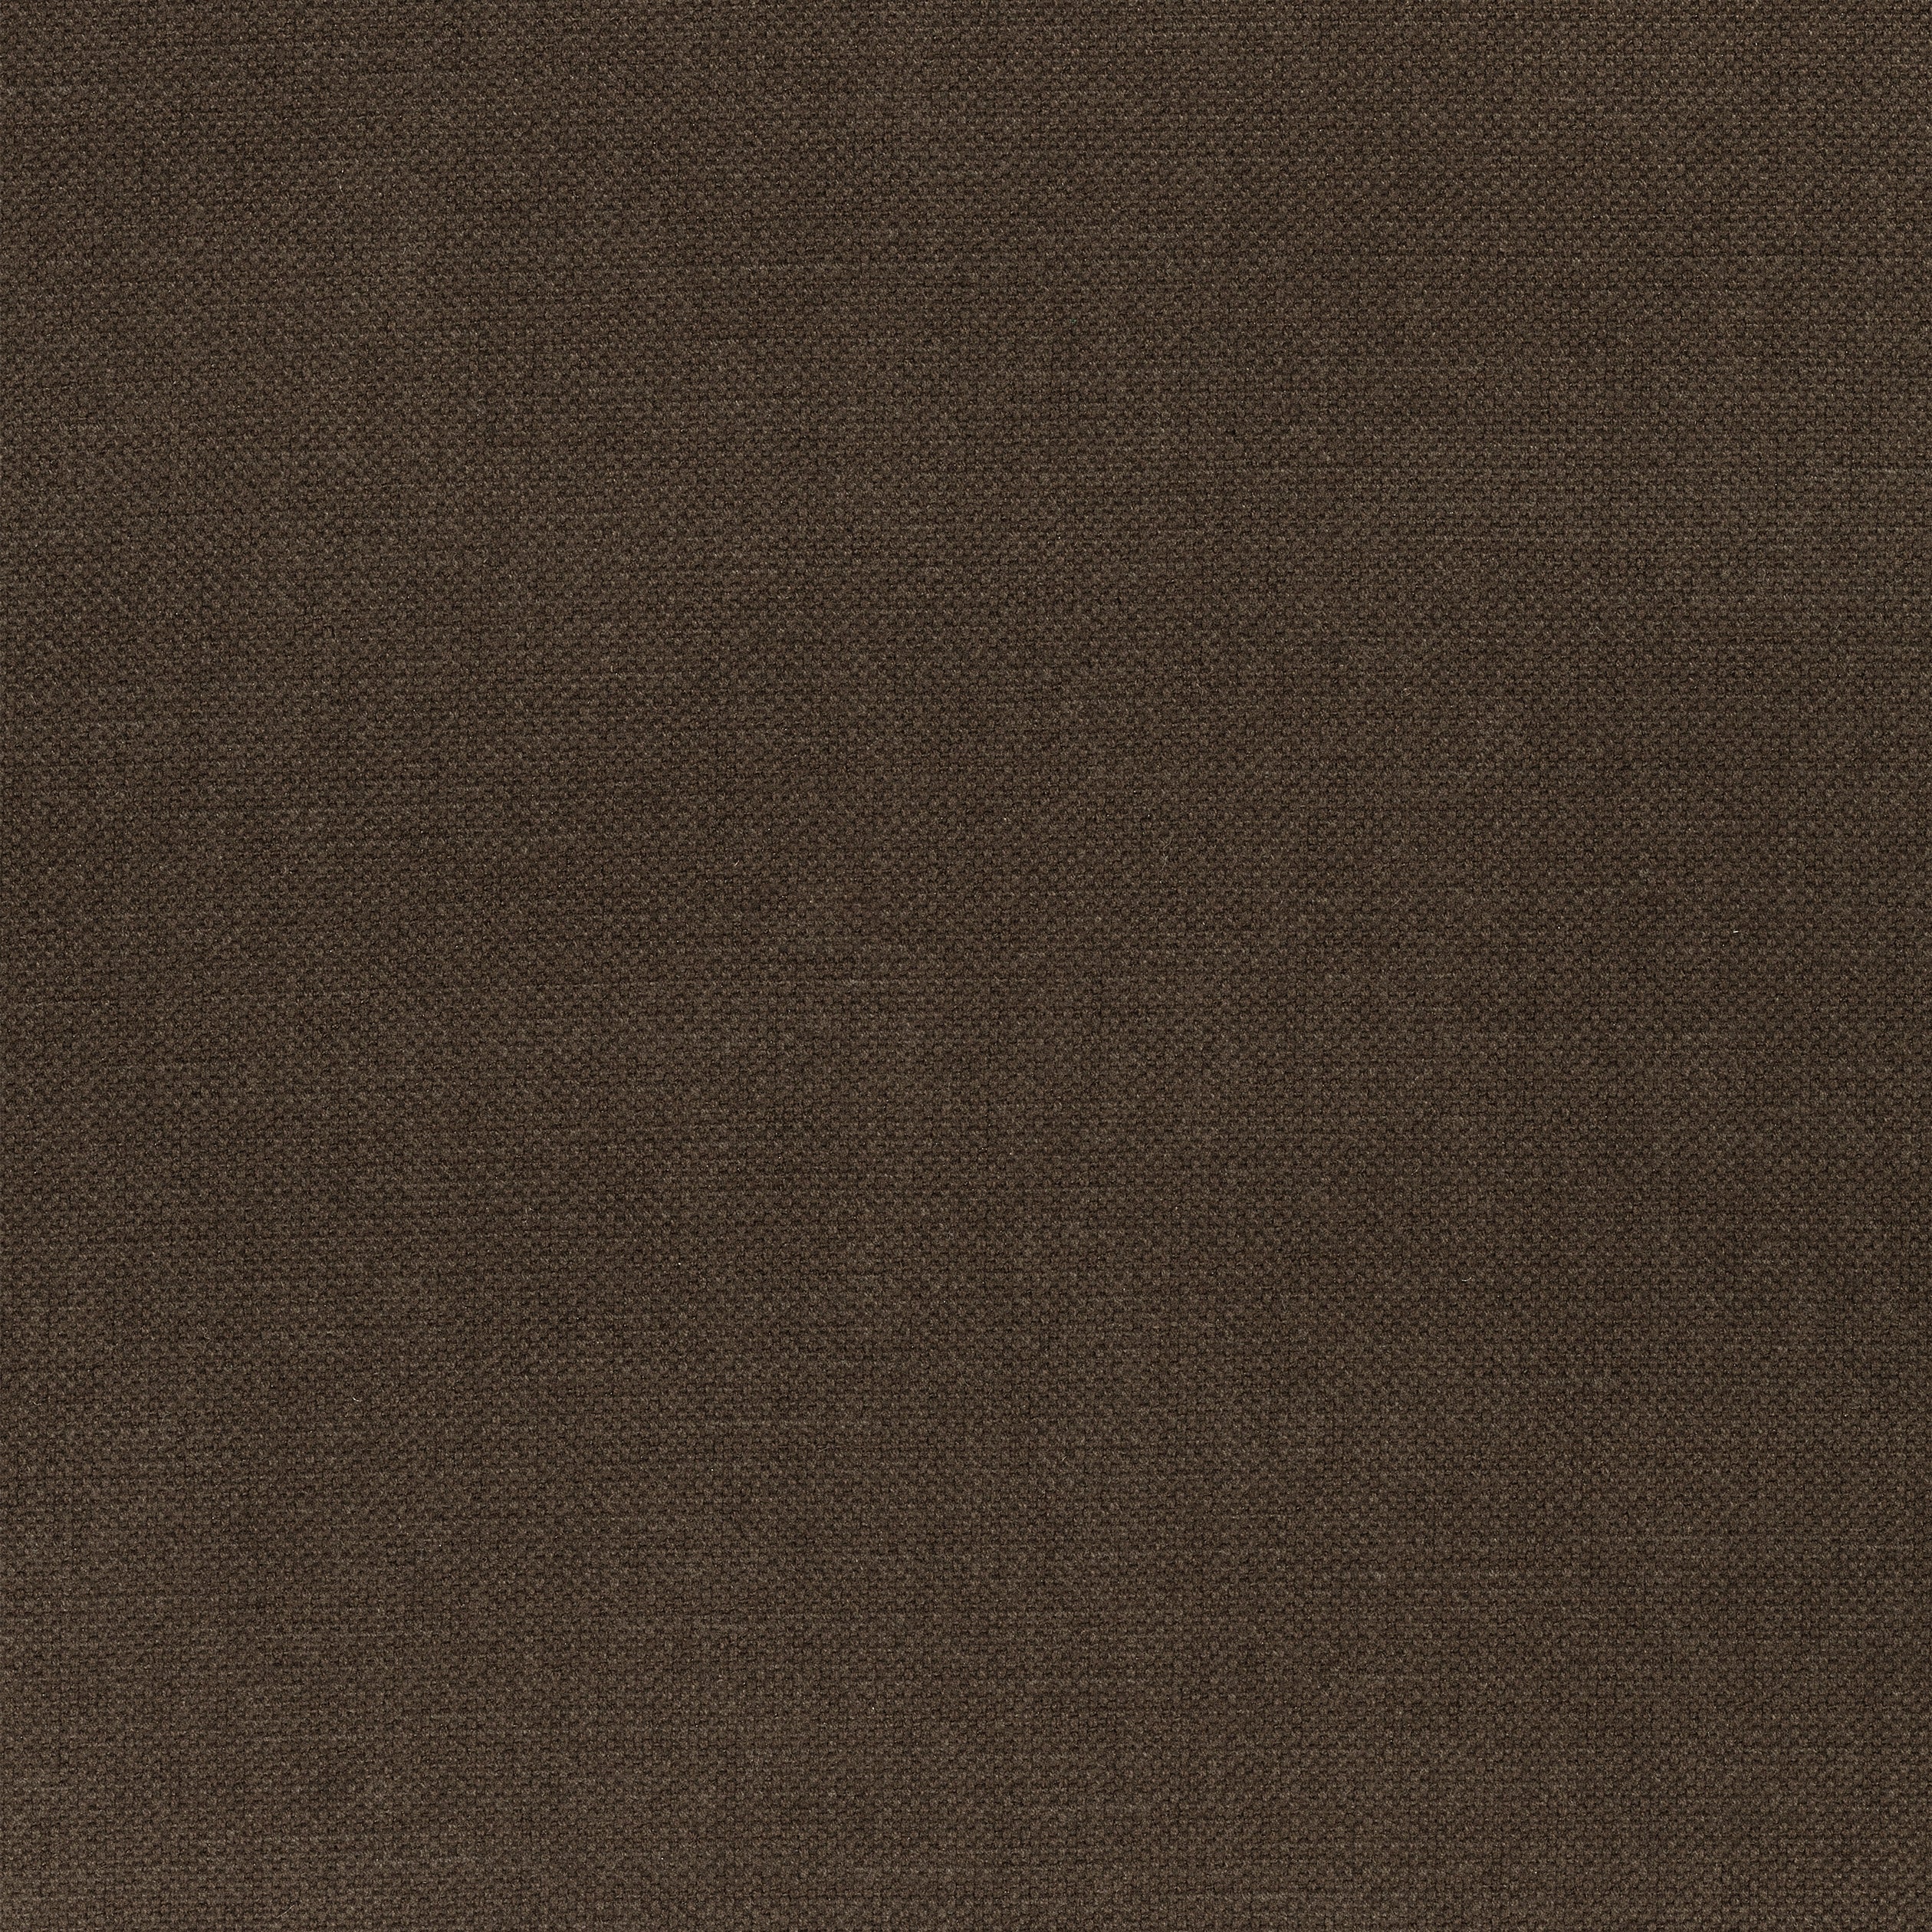 Prisma fabric in chocolate color - pattern number W70110 - by Thibaut in the Woven Resource Vol 12 Prisma Fabrics collection